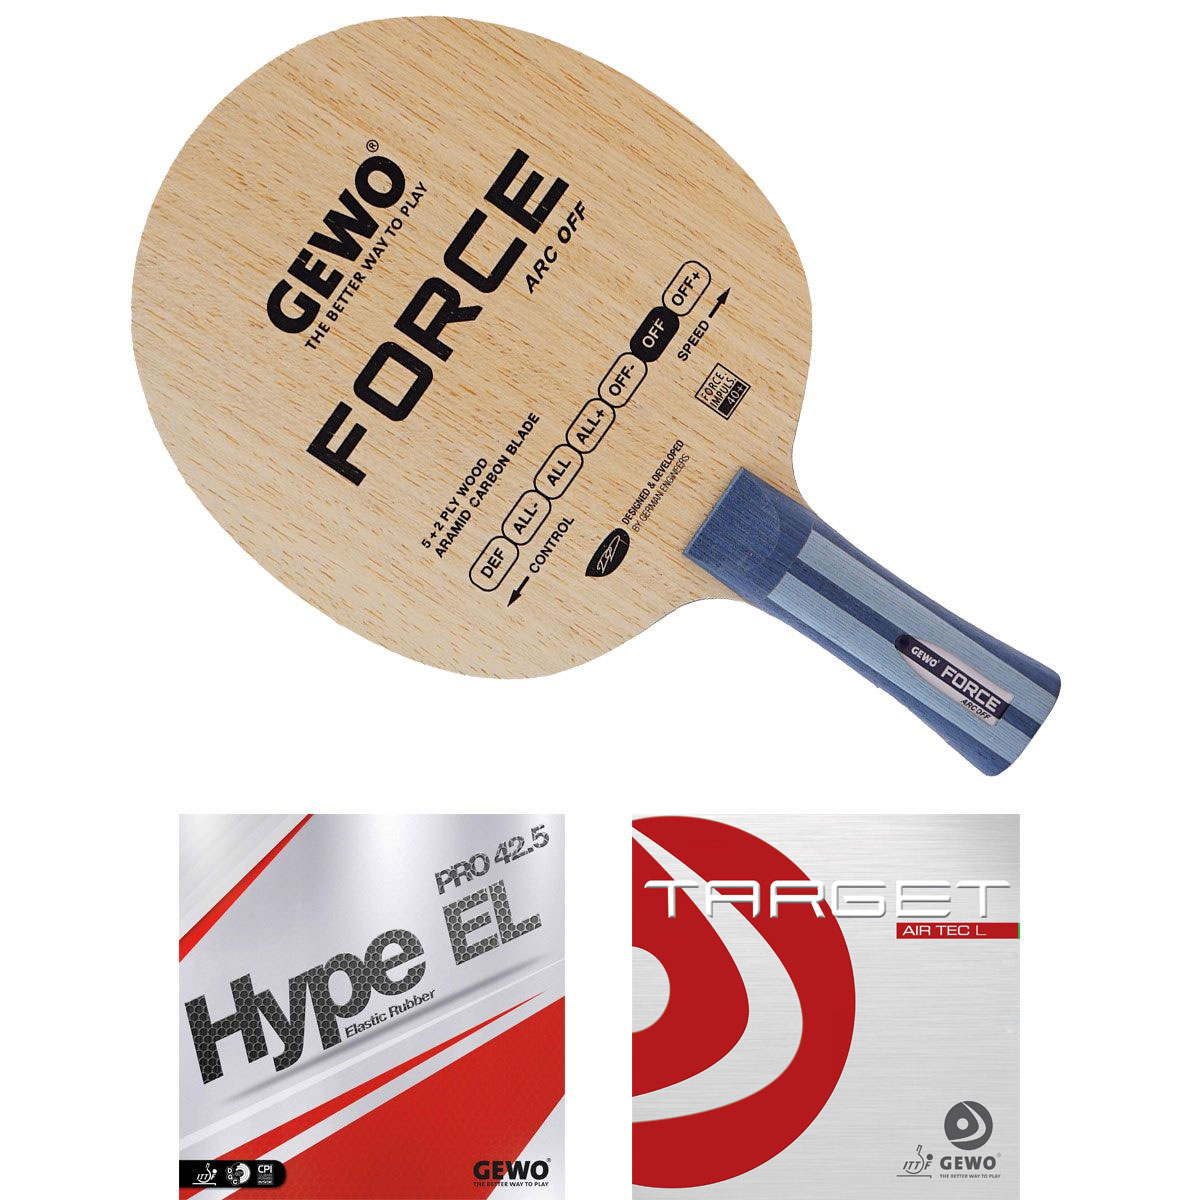 GEWO Bat: Blade Force ARC  with Hype EL Pro 42.5 + Target airTEC L  straight